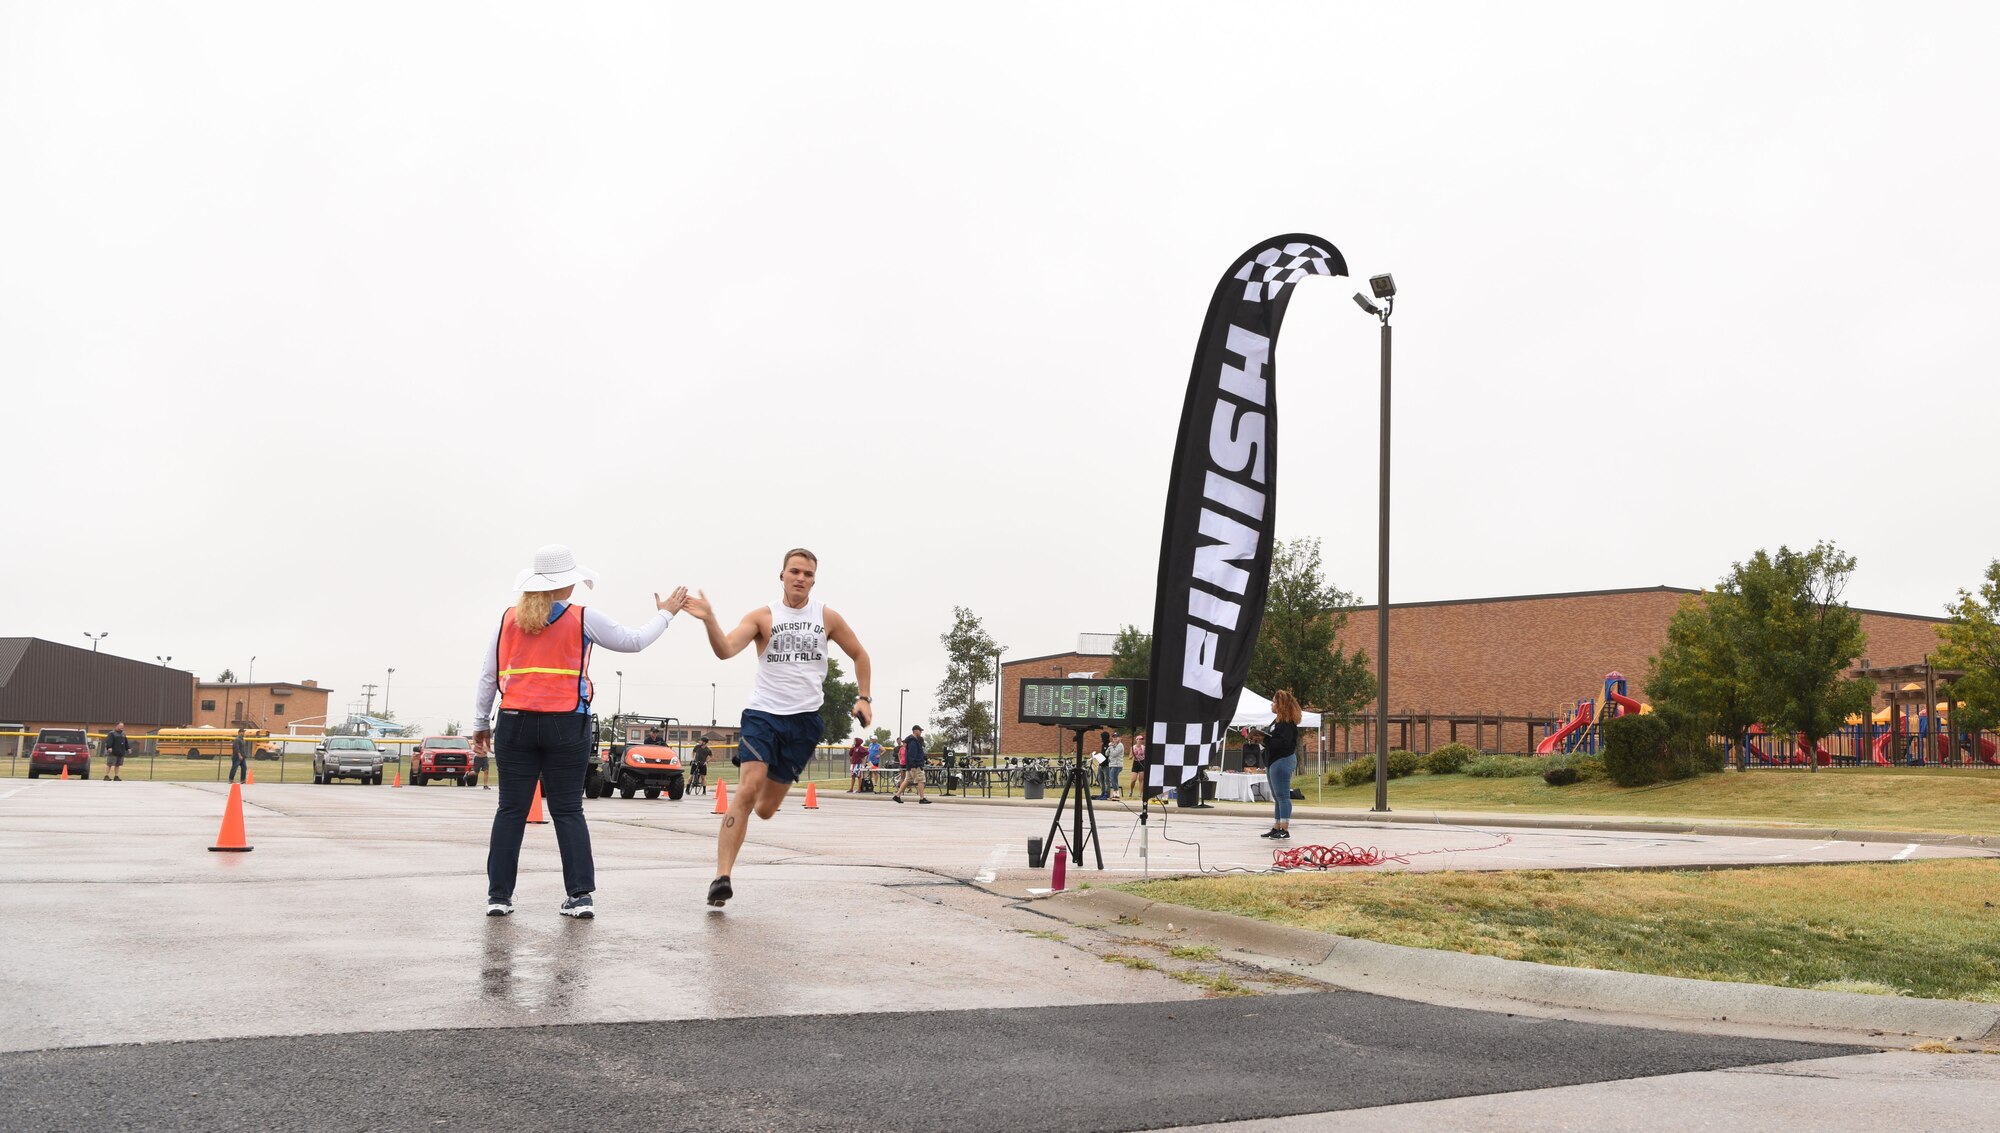 Senior Airman Andrew Kodis, a 28th Aircraft Maintenance Squadron load crew member, begins a five-kilometer run at Ellsworth Air Force Base, S.D., Sept. 15, 2018. The 28th Force Support Squadron hosted the tri-to-b1 triathlon, which consisted of a 500-meter swim, a five-kilometer run and a 10-kilometer bicycle ride. (U.S. Air Force Photo by Airman 1st Class Thomas Karol)